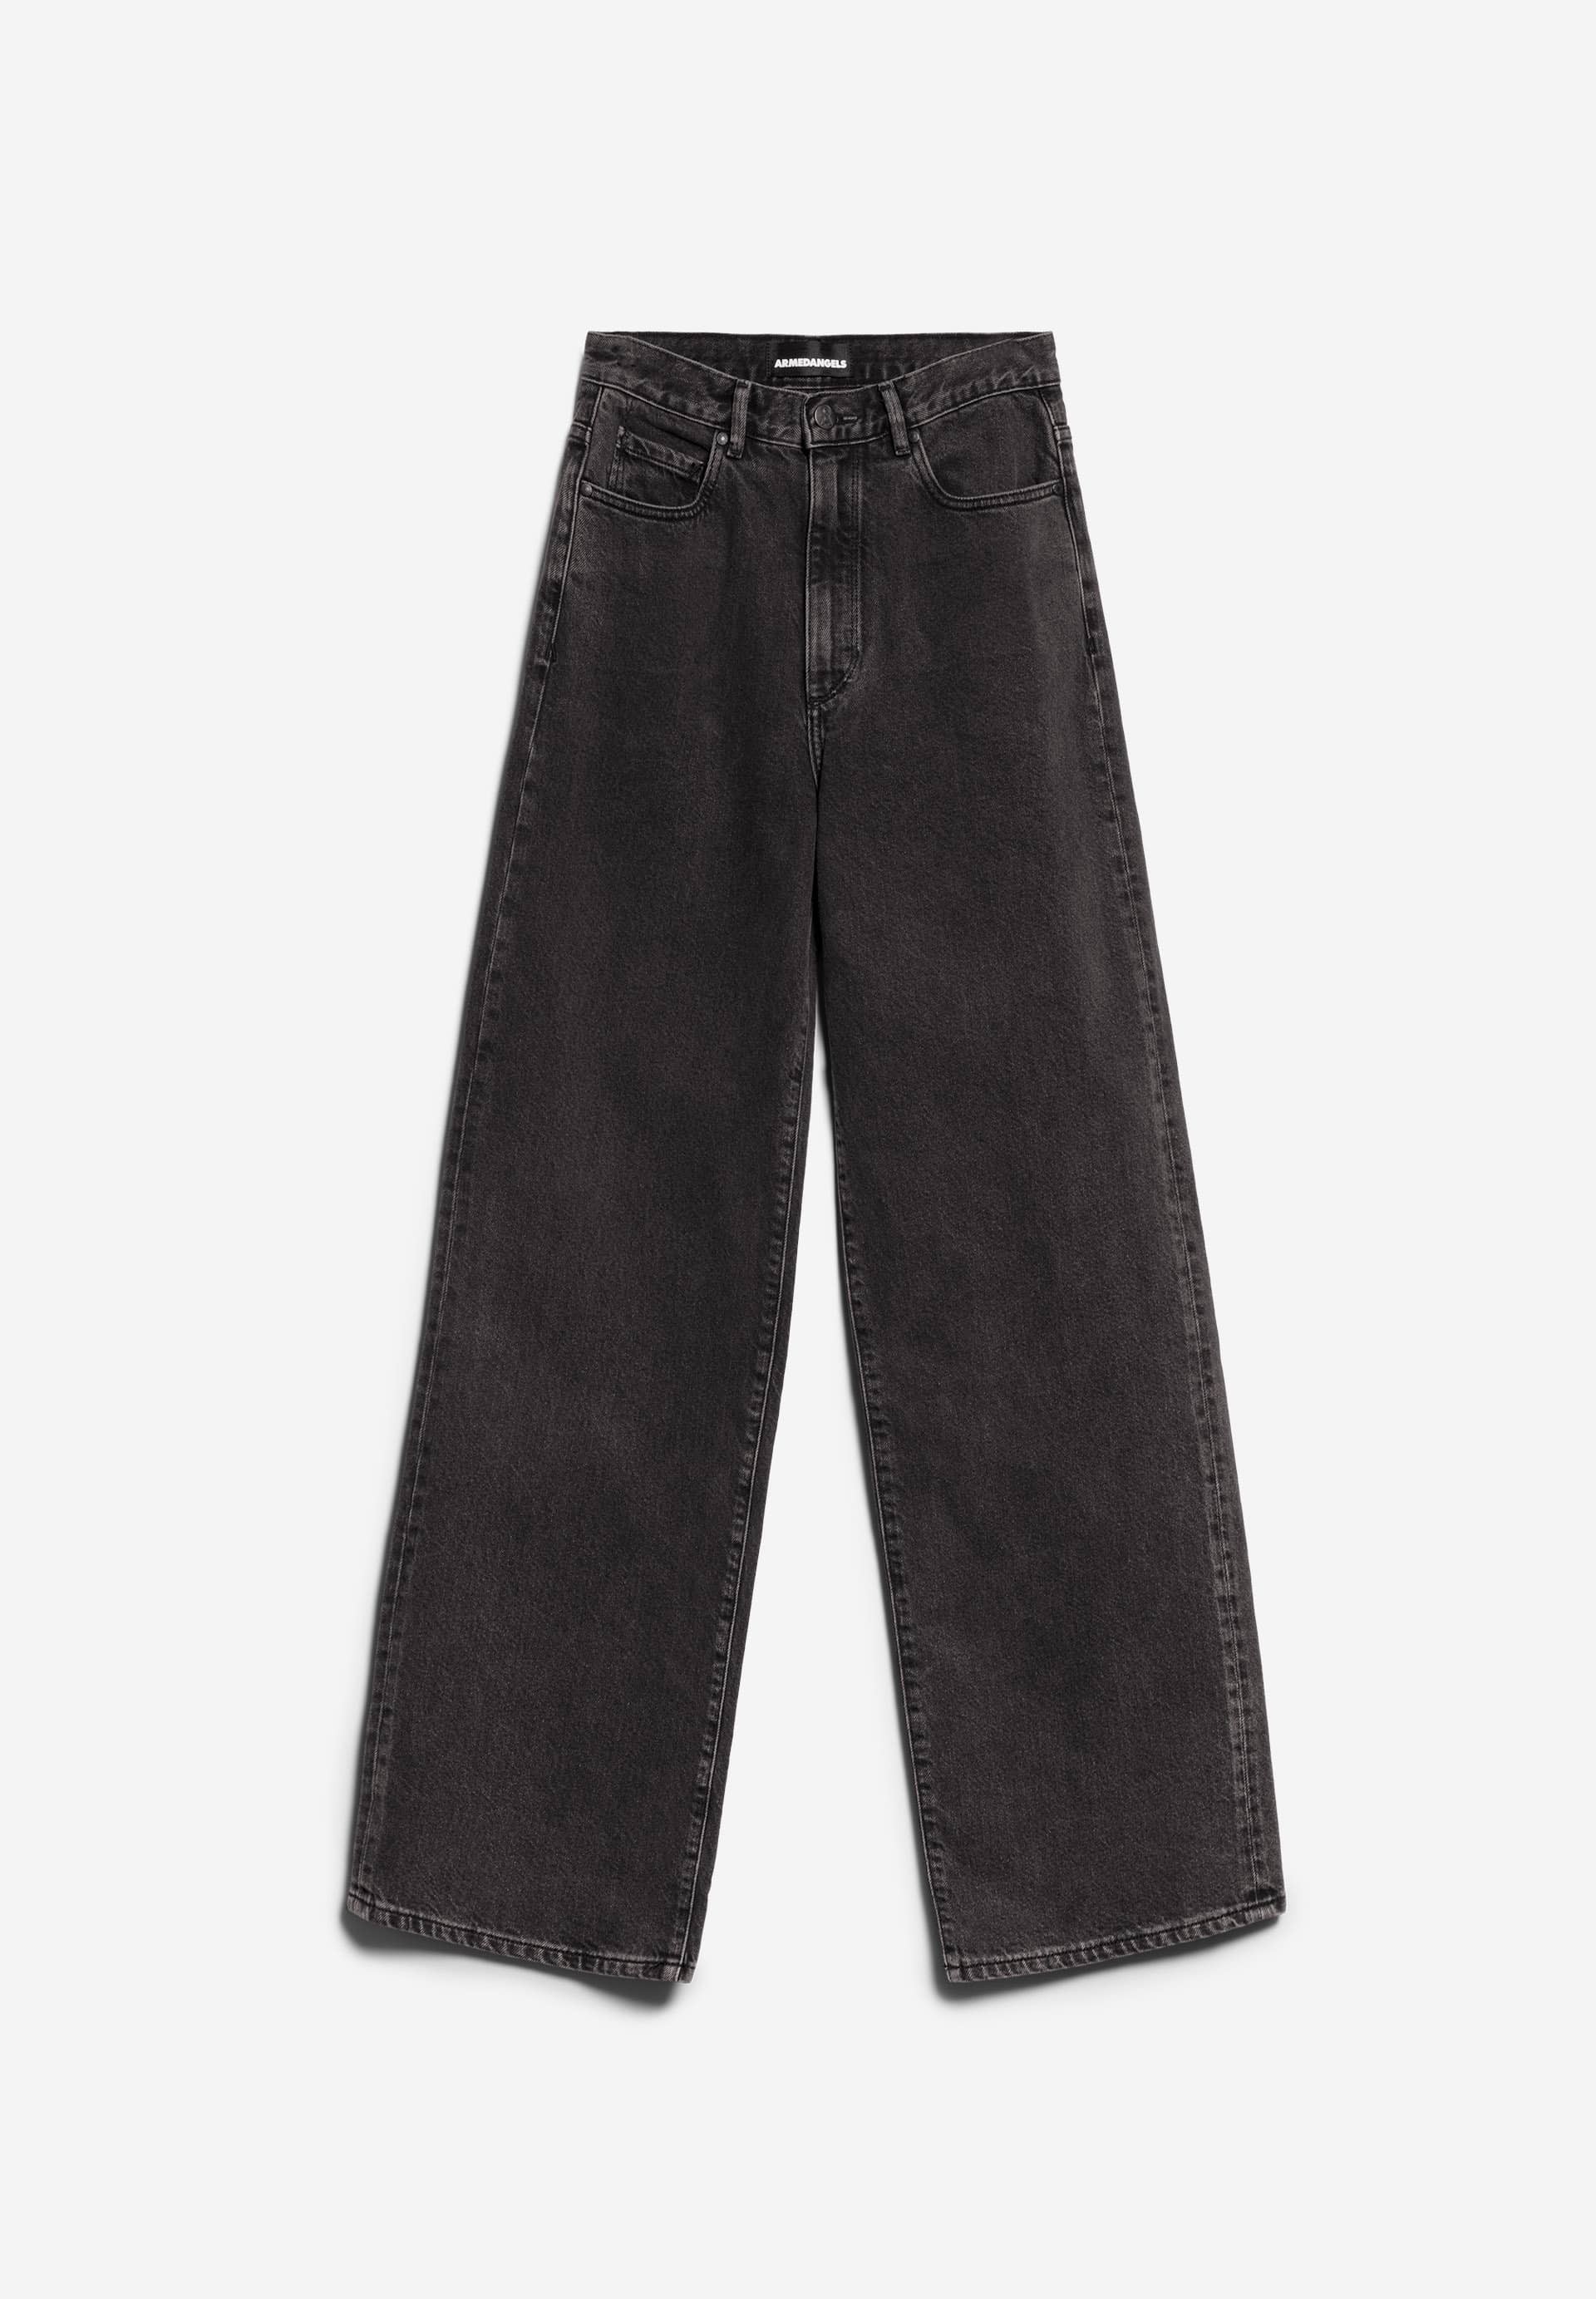 ENIJAA Loose Fit Denim made of recycled Cotton